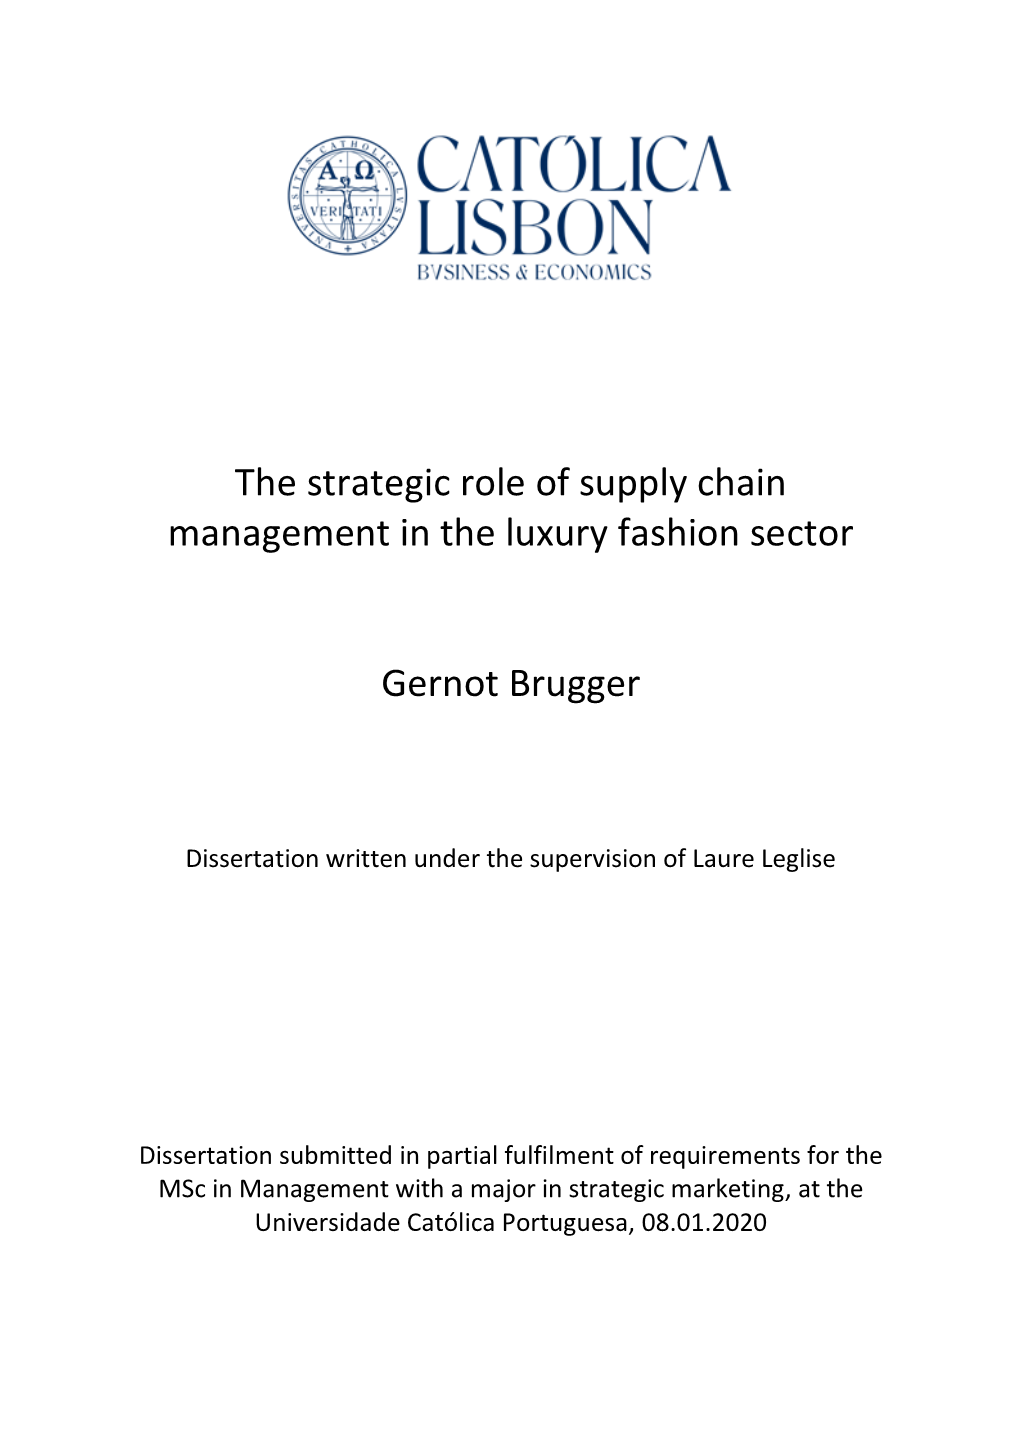 The Strategic Role of Supply Chain Management in the Luxury Fashion Sector Gernot Brugger